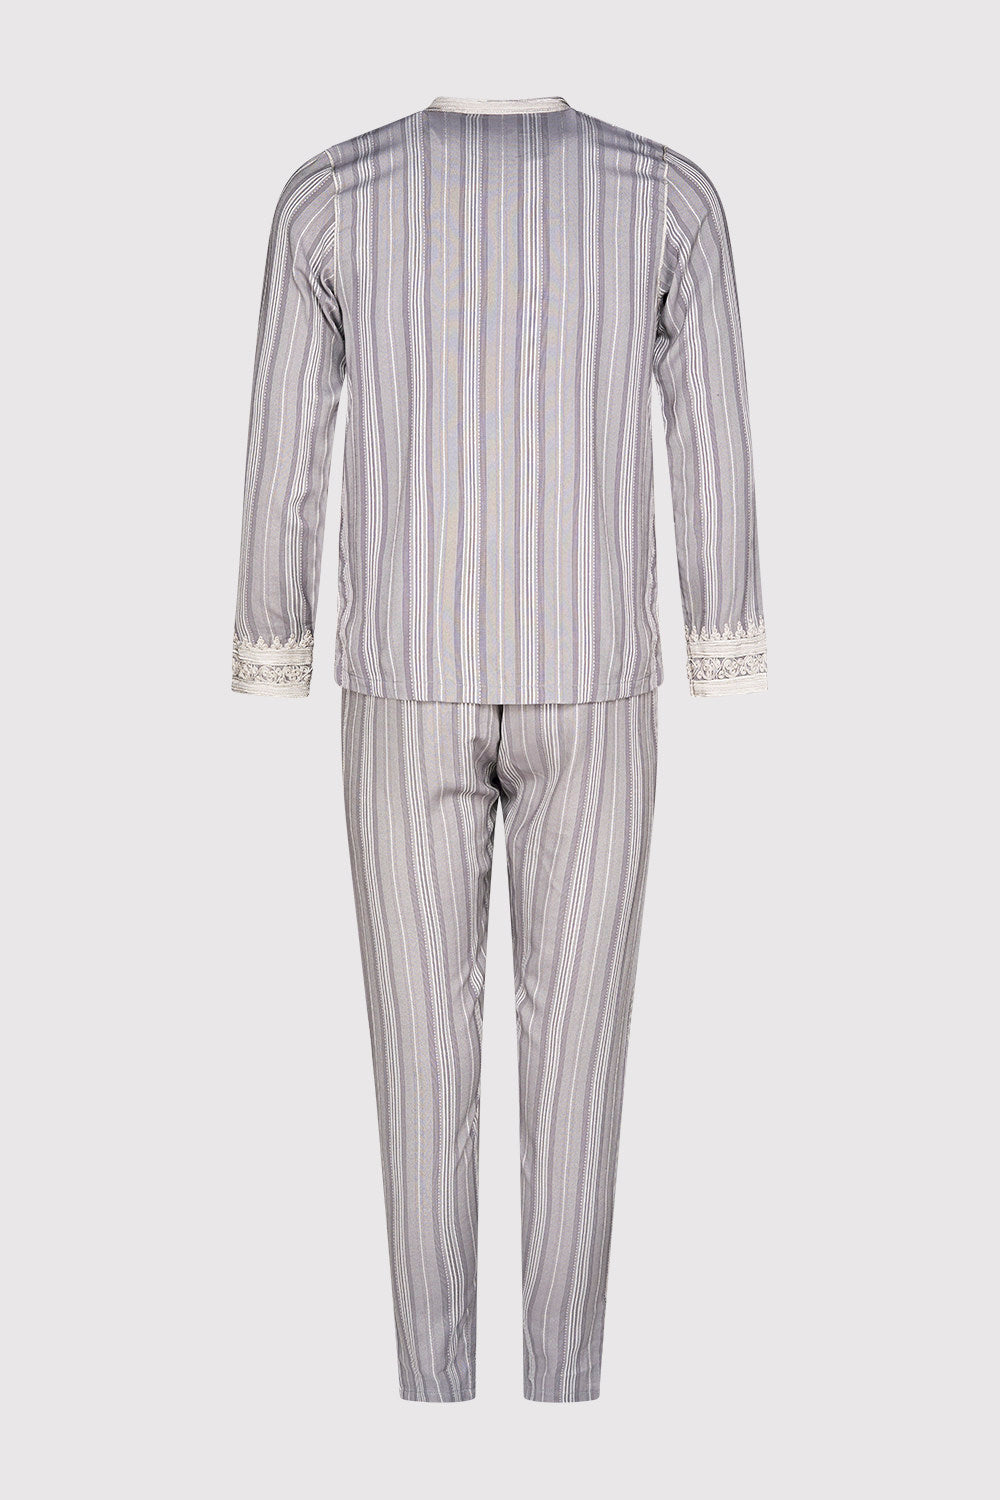 Jabador Nouh Embroidered Collarless Long Sleeve Tunic Top and Trousers Men's Co-Ord Set in Striped Grey